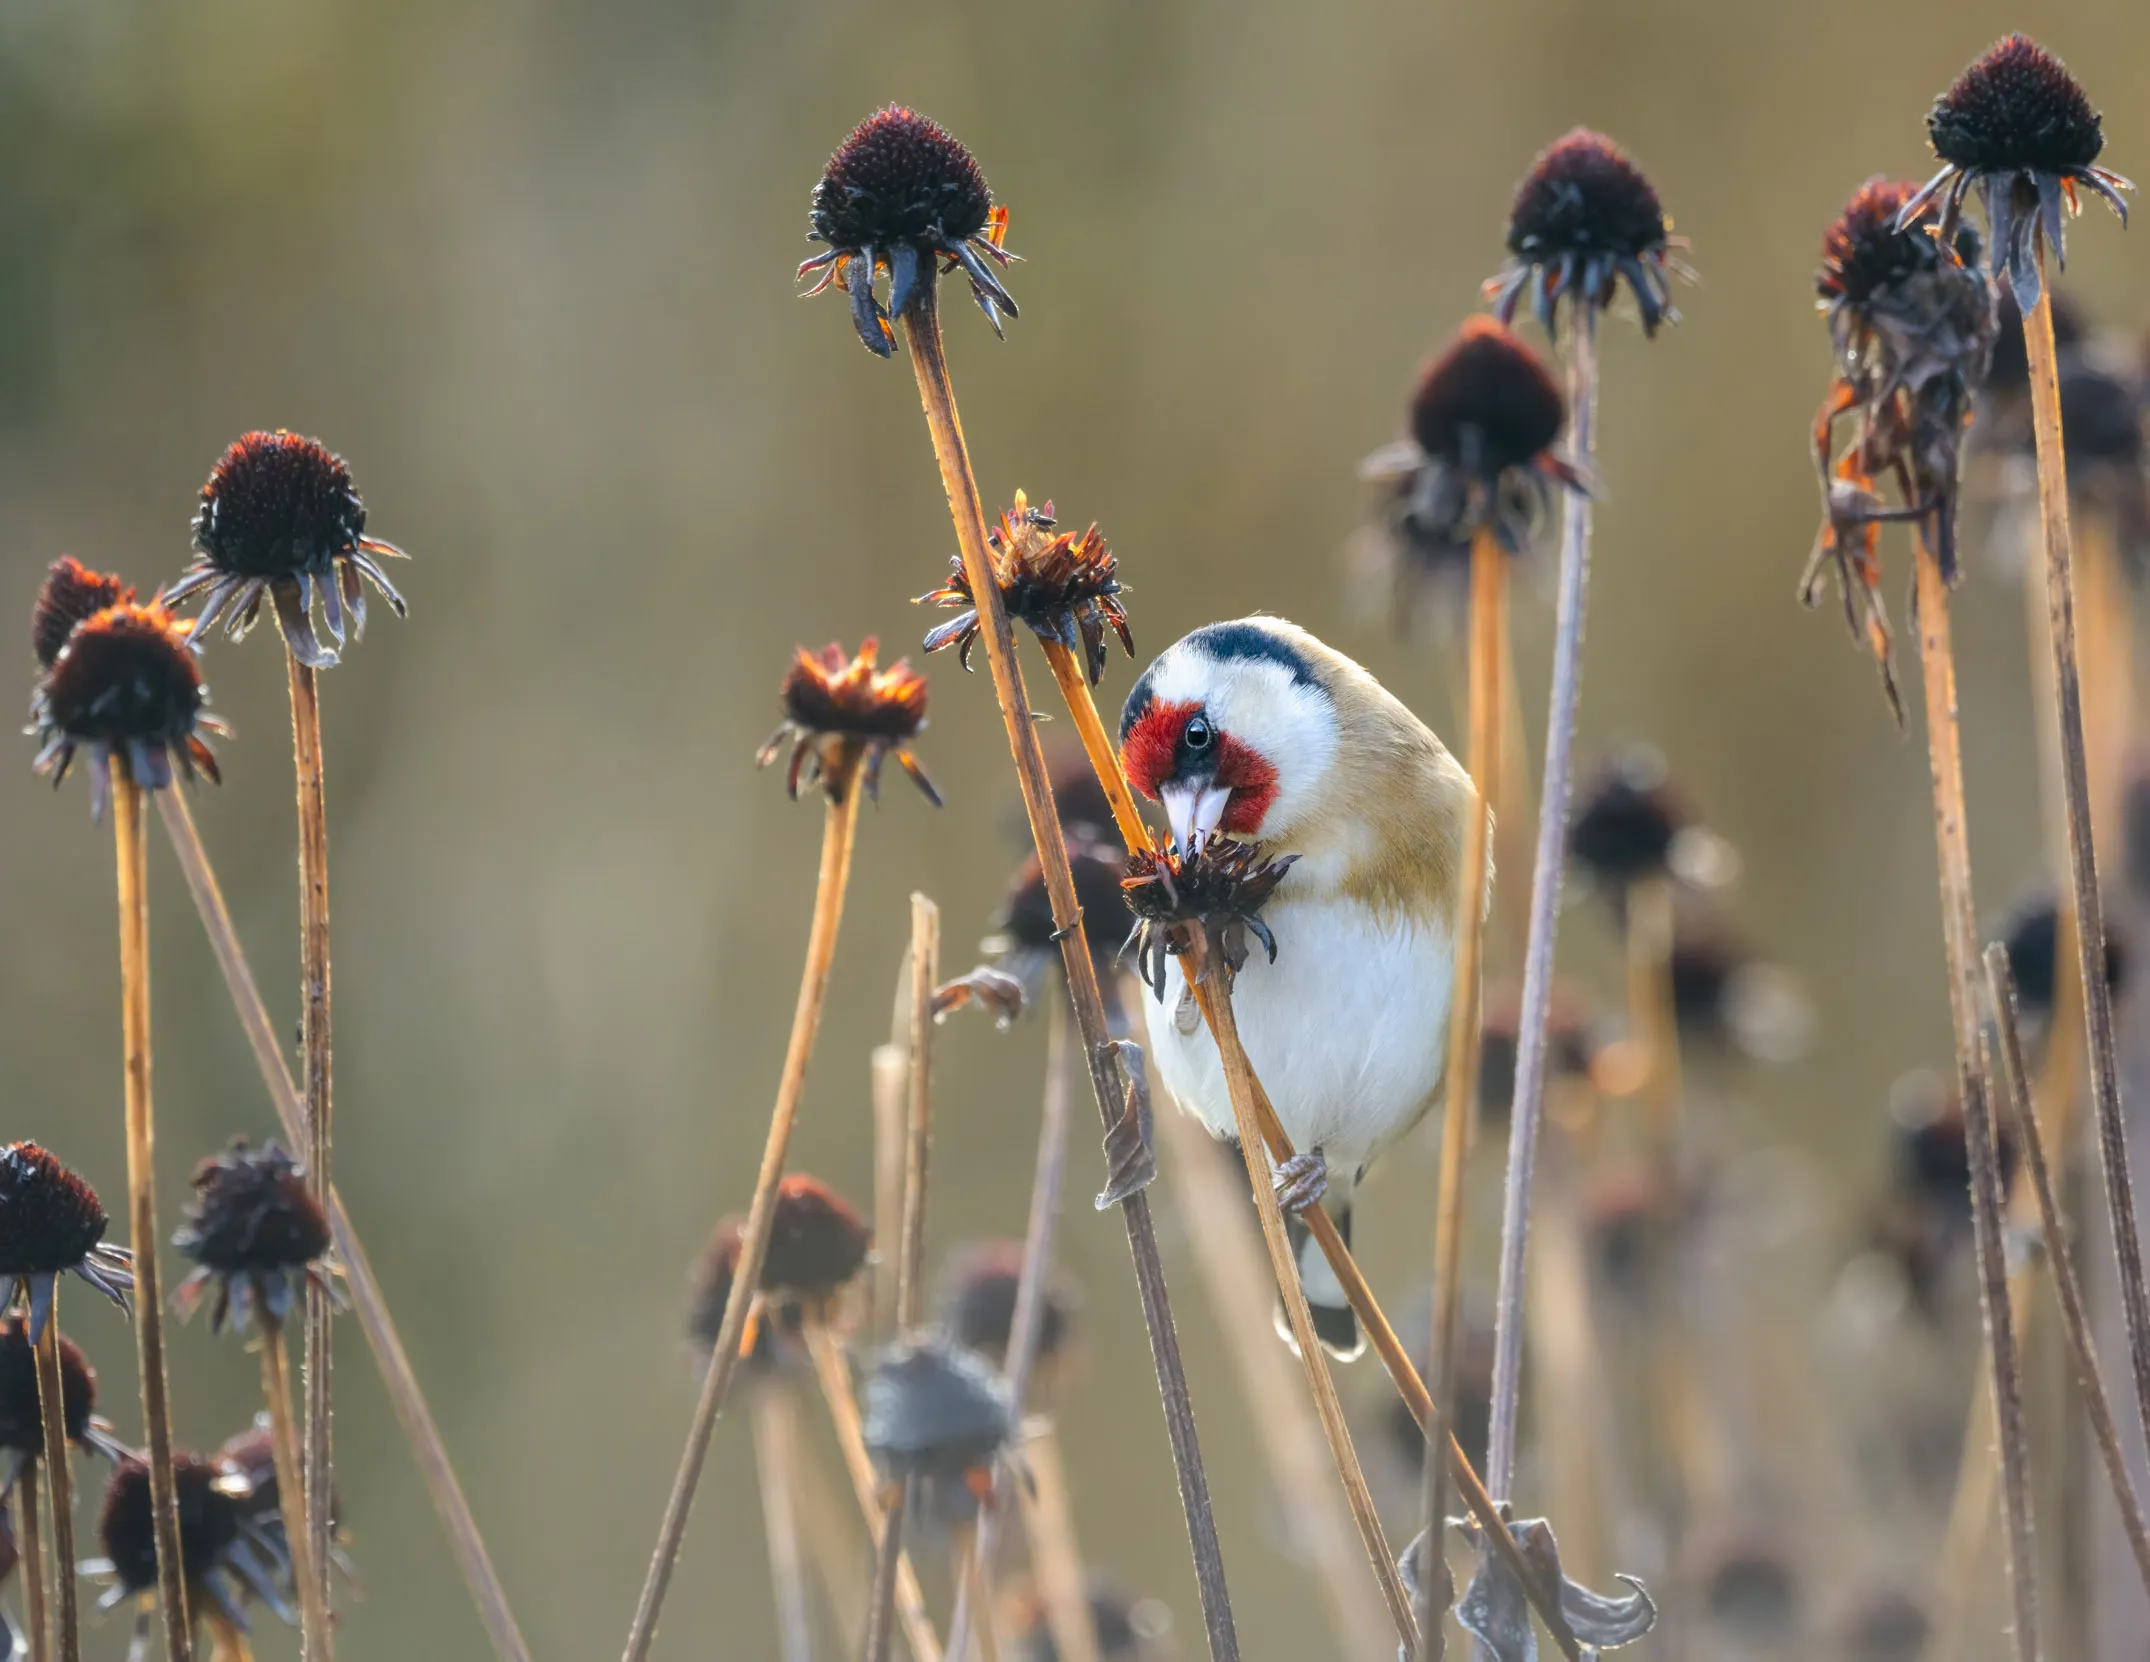 A lone Goldfinch perched on the stem of a dried flower, probing the seedhead with their beak.